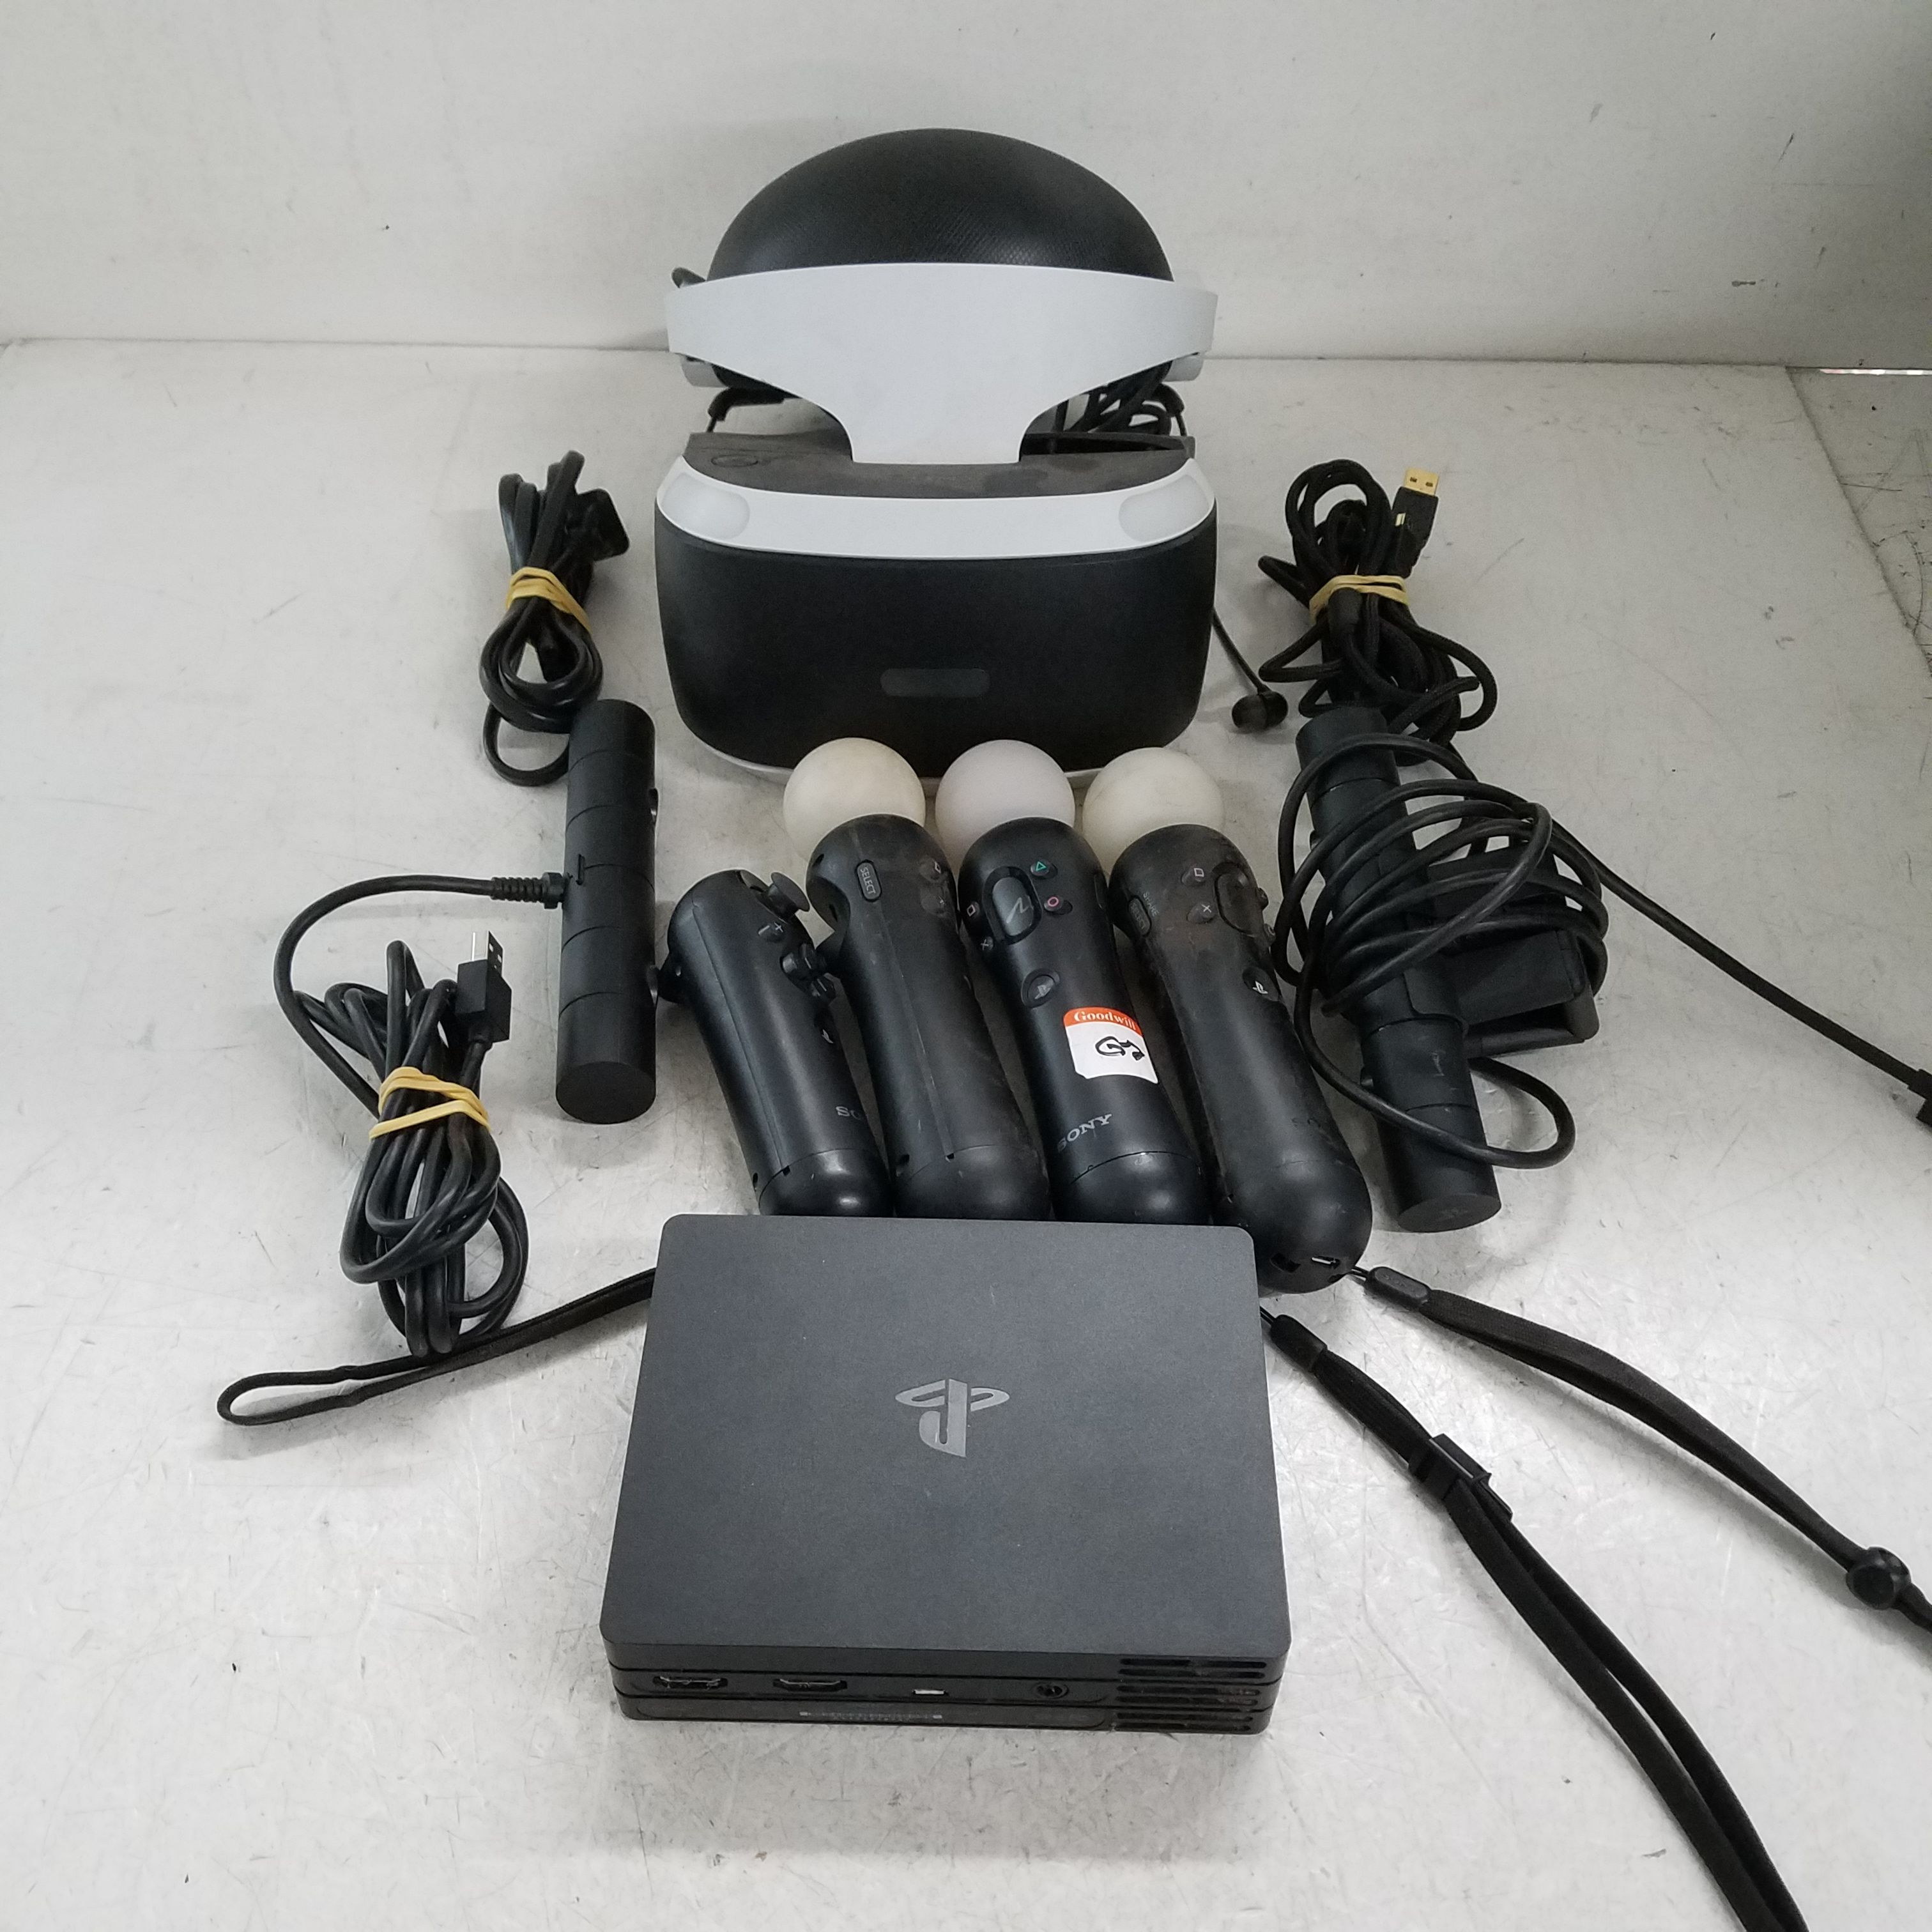 Buy the UNTESTED Sony Playstation VR Glasses PS4 Virtual 